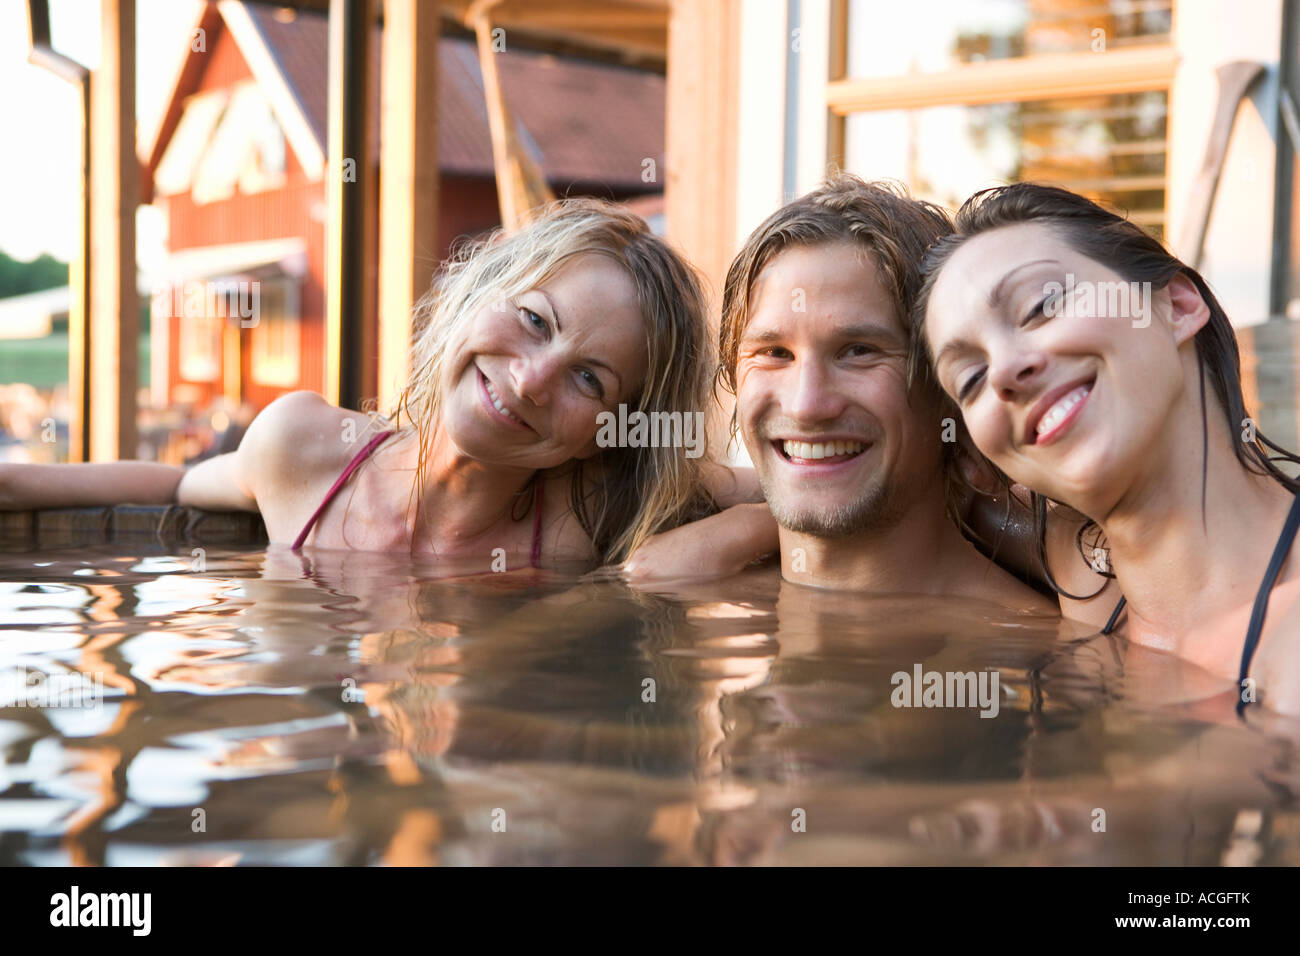 Two women and a man bathing in a barrel outdoors. Stock Photo